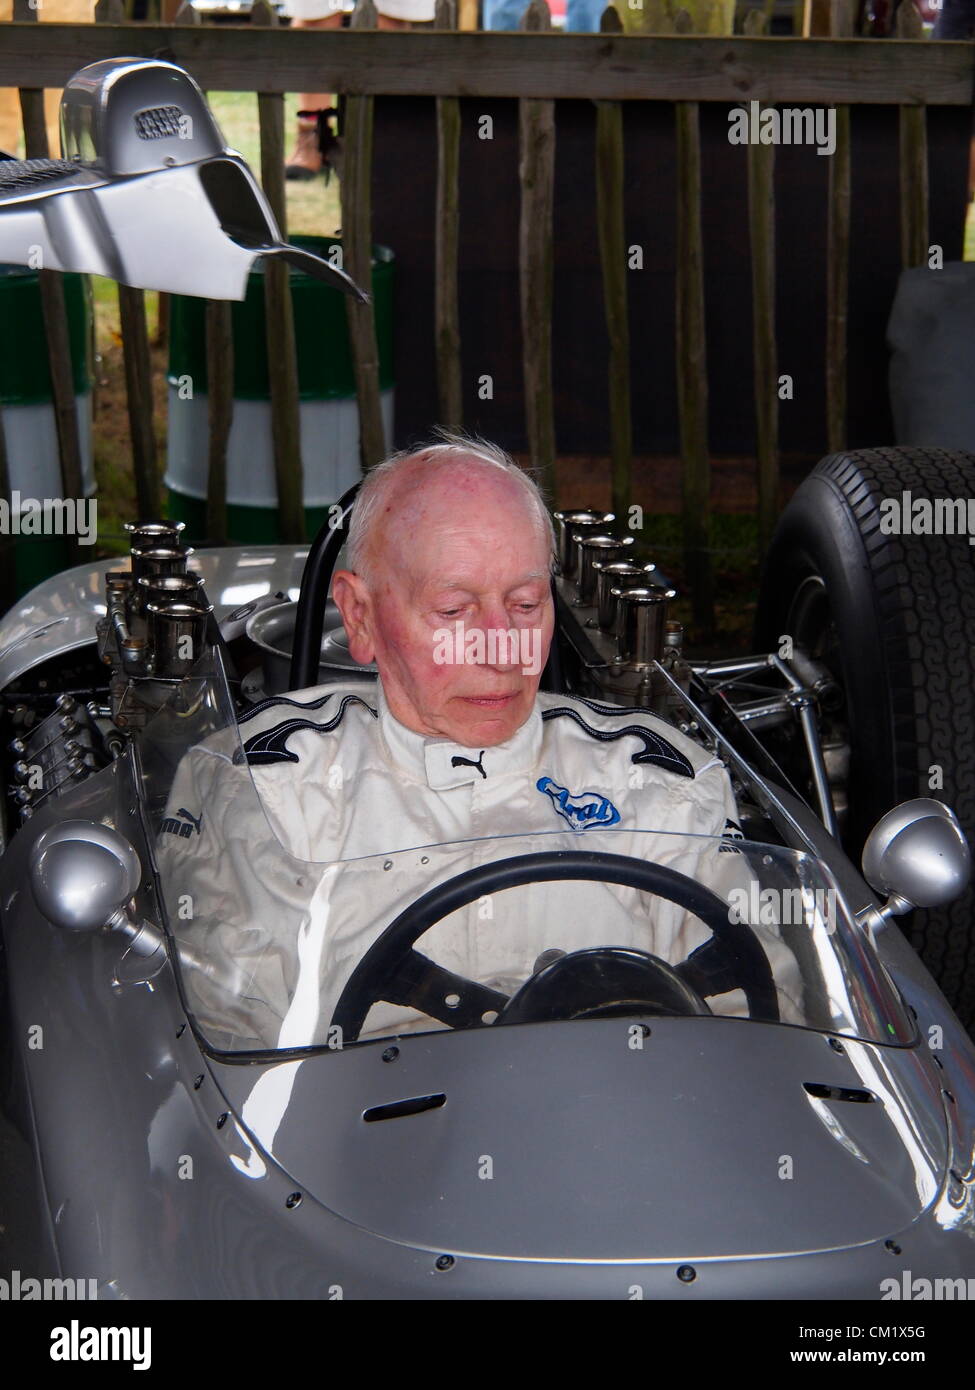 Goodwood, UK. John Surtee's OBE behind the wheel of a 1962 Porsche 804 at the 2012 Goodwood Revival meeting. Stock Photo